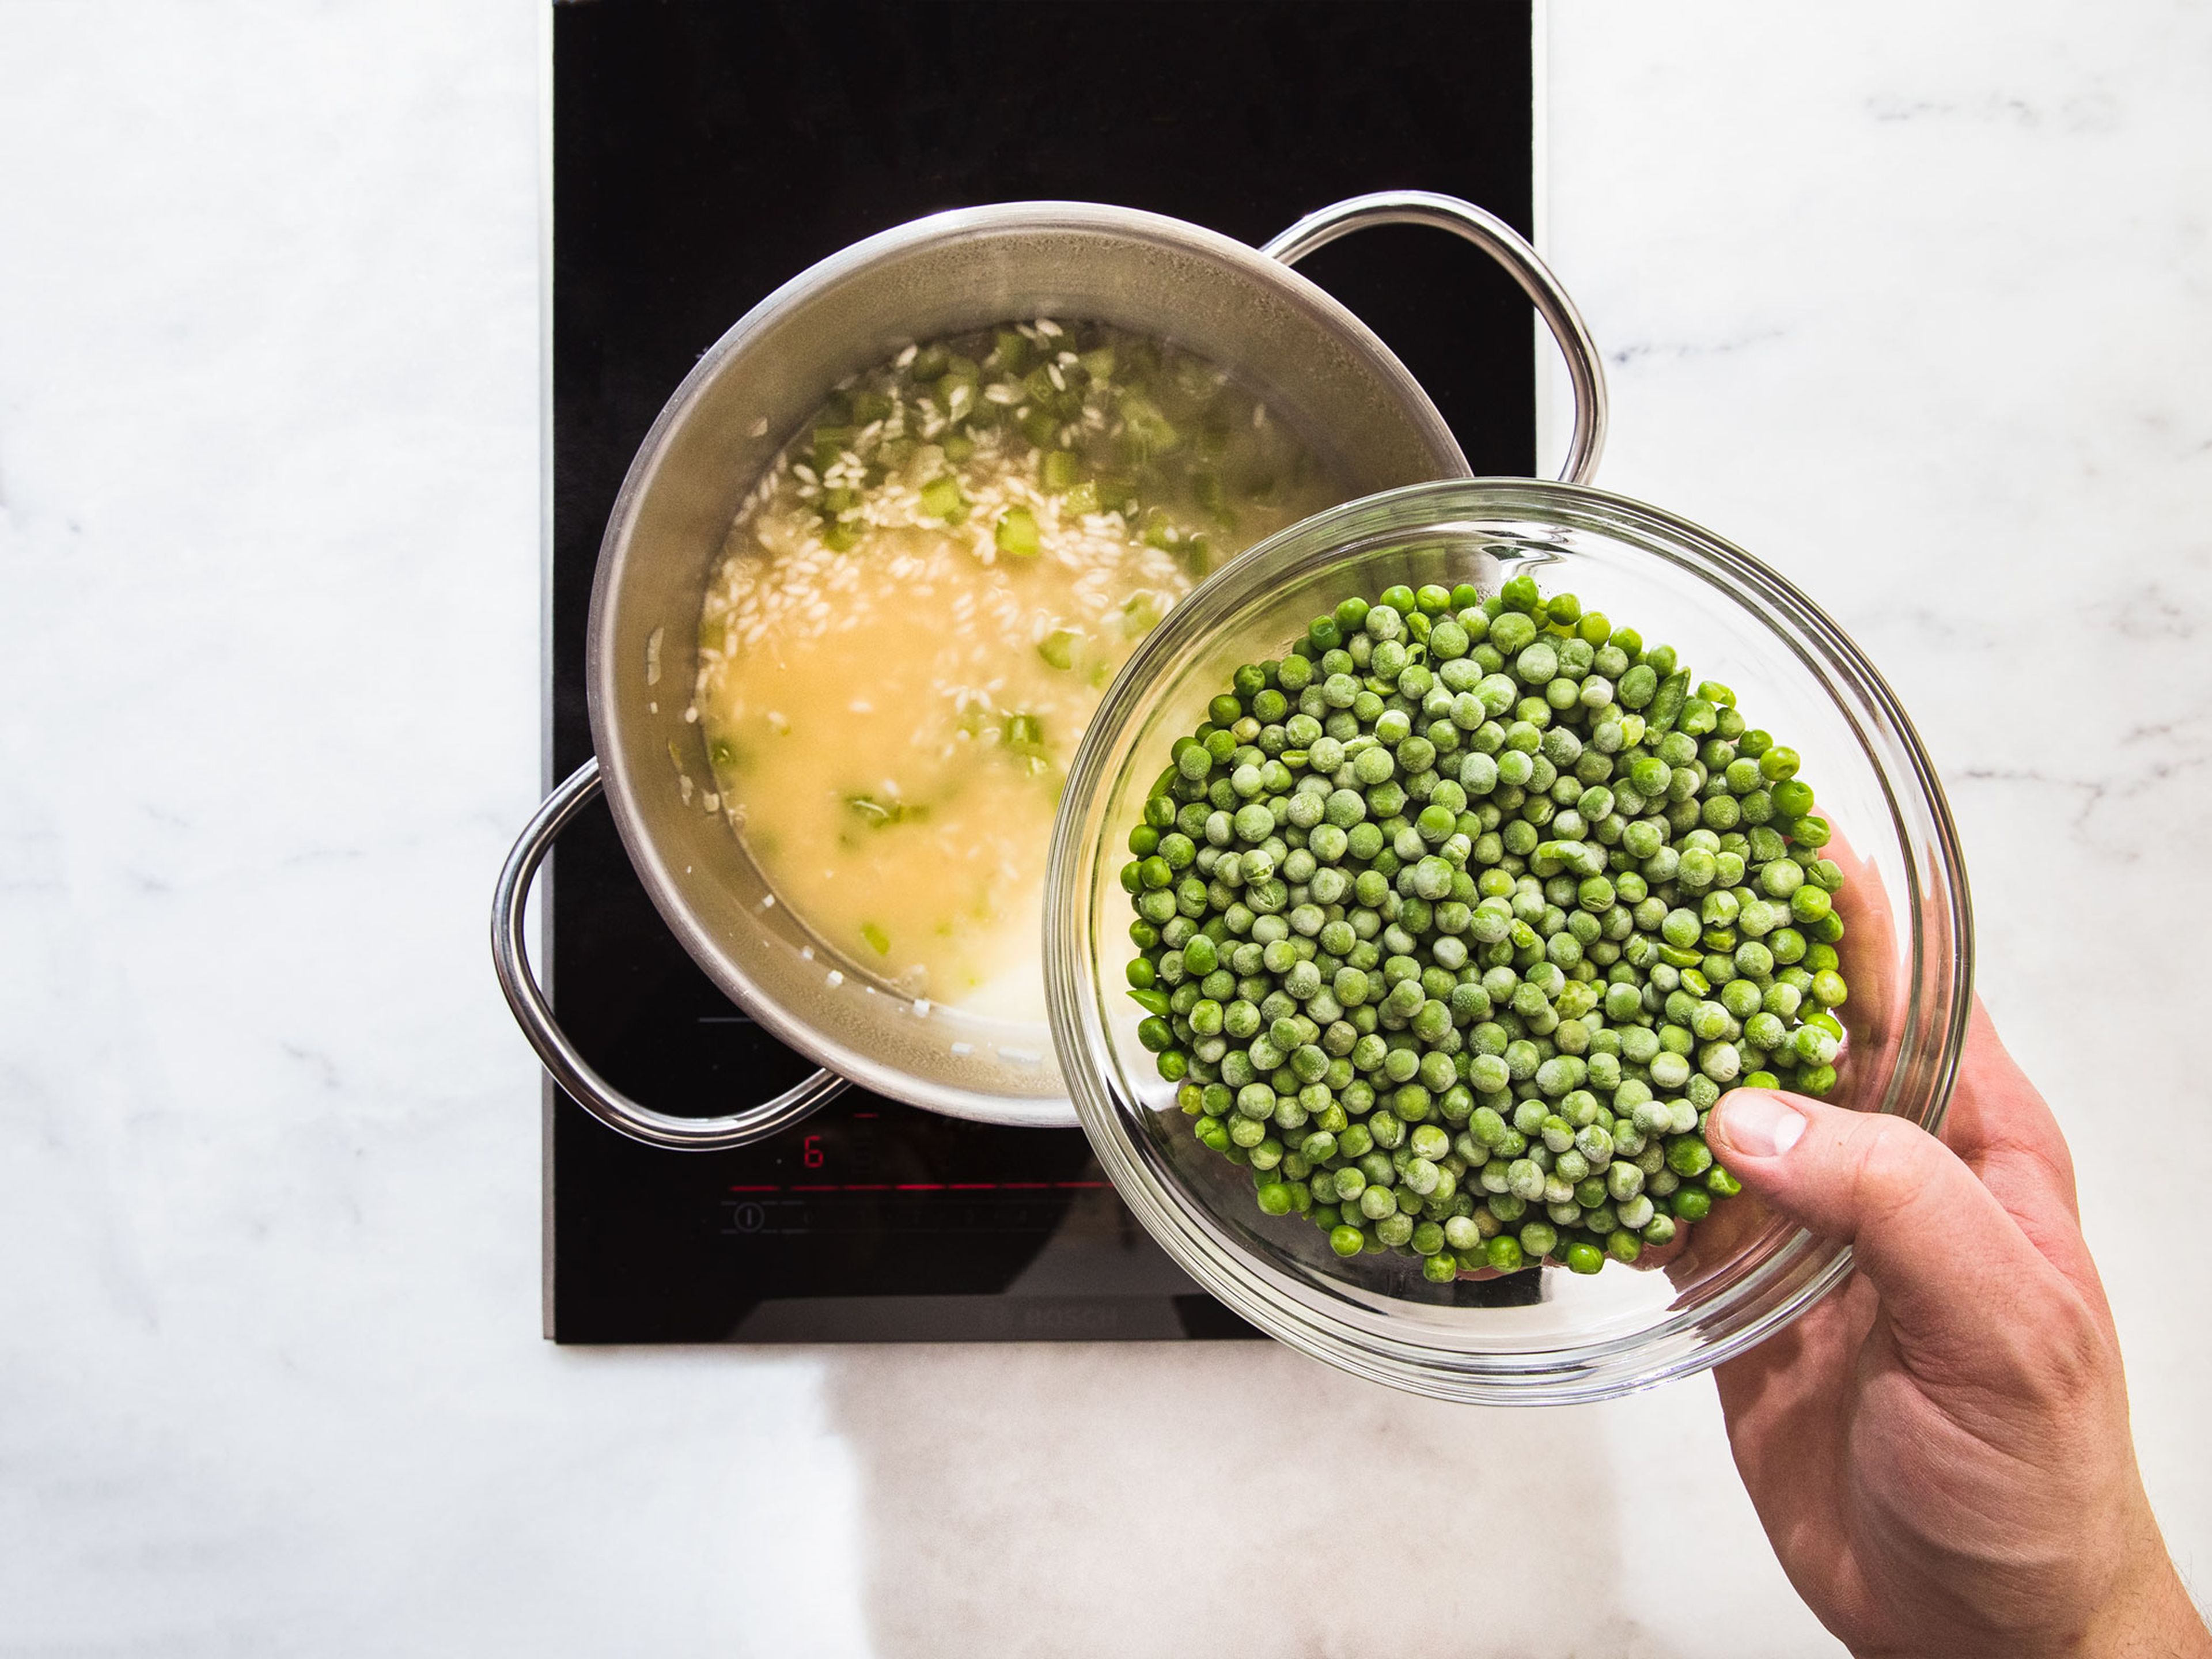 Melt butter in a large pot over medium heat and sauté minced onion, garlic, and celery for approx. 2 – 3 min., or until fragrant. Add rice and fry over low heat for approx. 5 min. Deglaze with the wine and some warm vegetable broth. Stir until the liquid is absorbed and add peas.